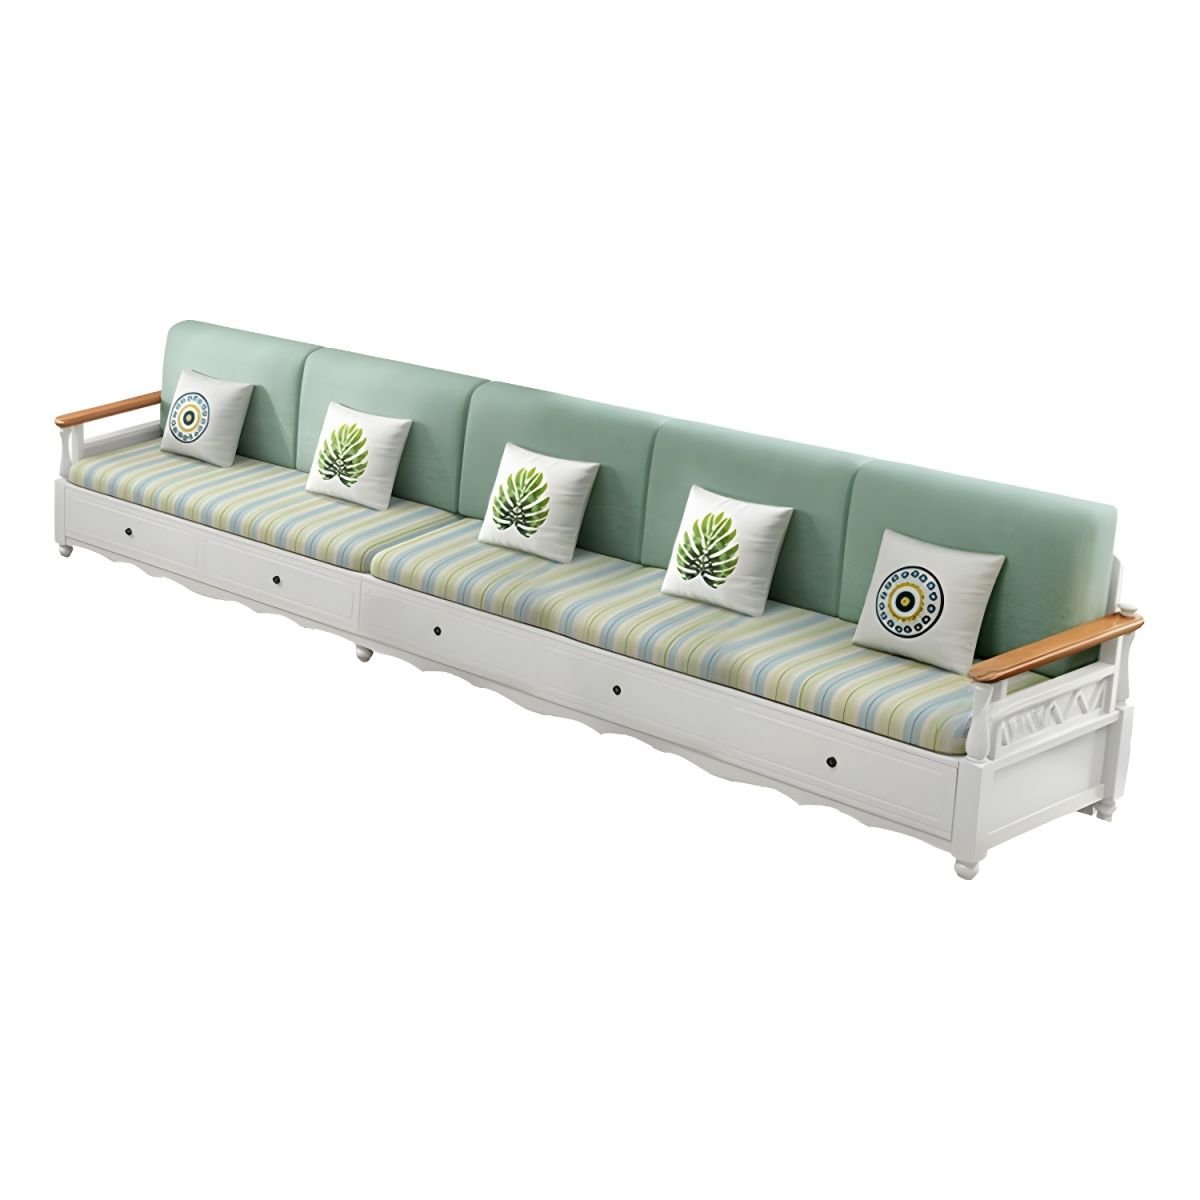 Rustic Green Farmhouse Sectional Sofa with Under-Seat Storage for Shallow Width Comfort - 141"L x 31"W x 35"H Cotton and Linen